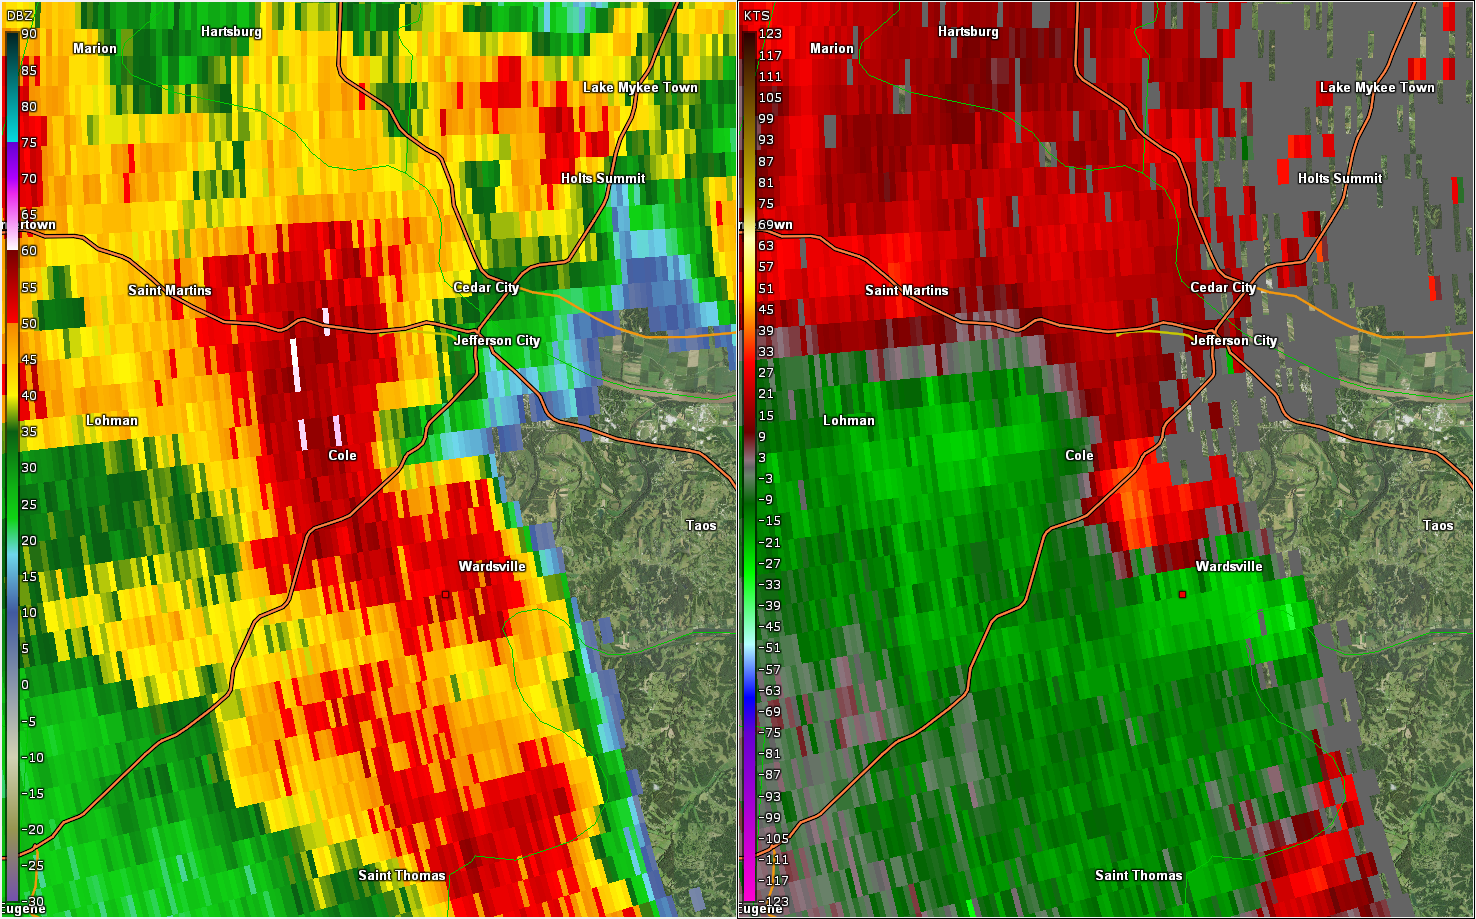 Two panel radar picture of reflectivity and storm relative velocity of the tornado.